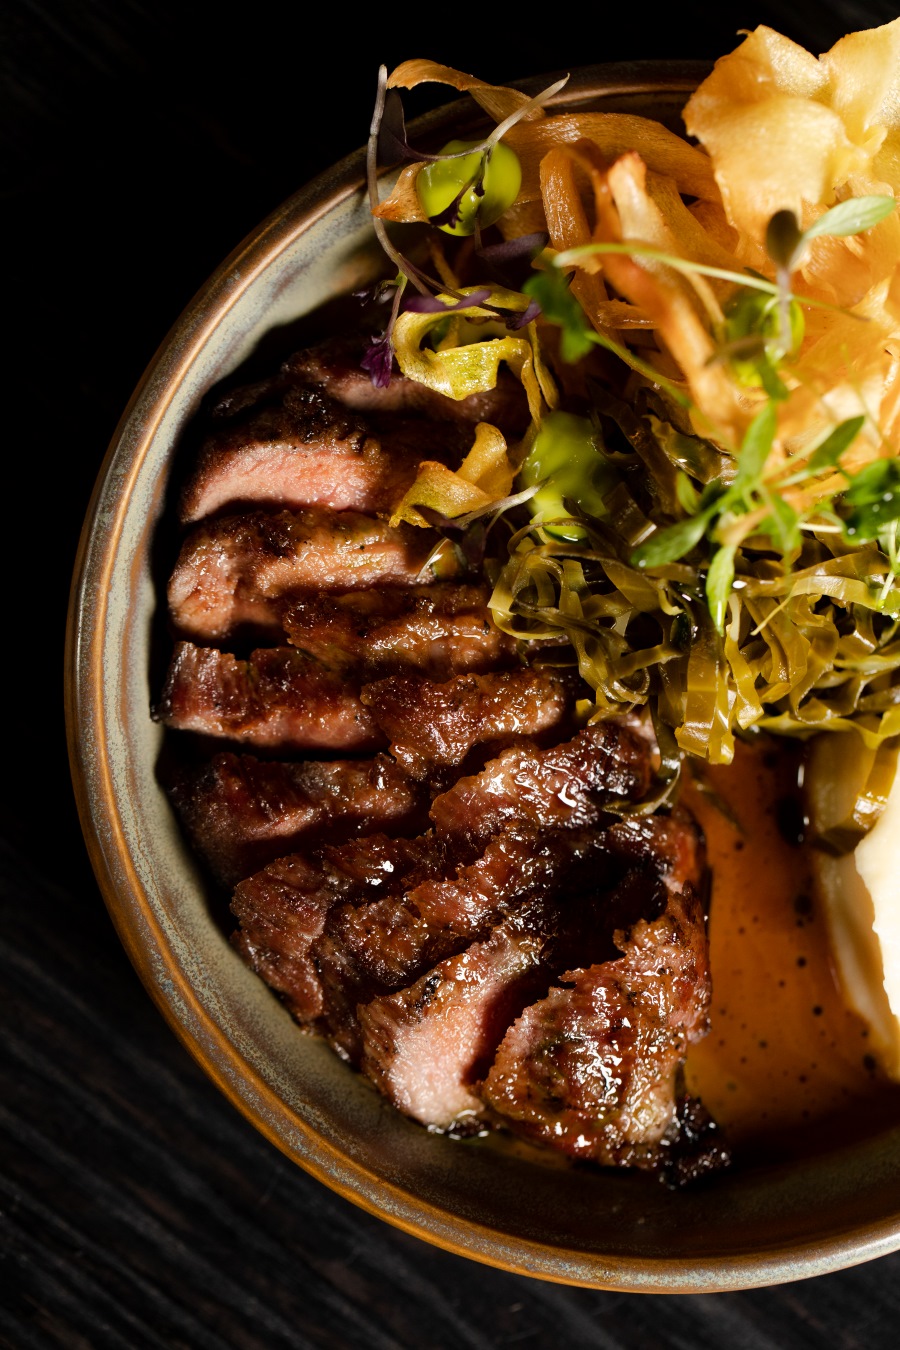 Parsnips, pickled cabbage, sirloin